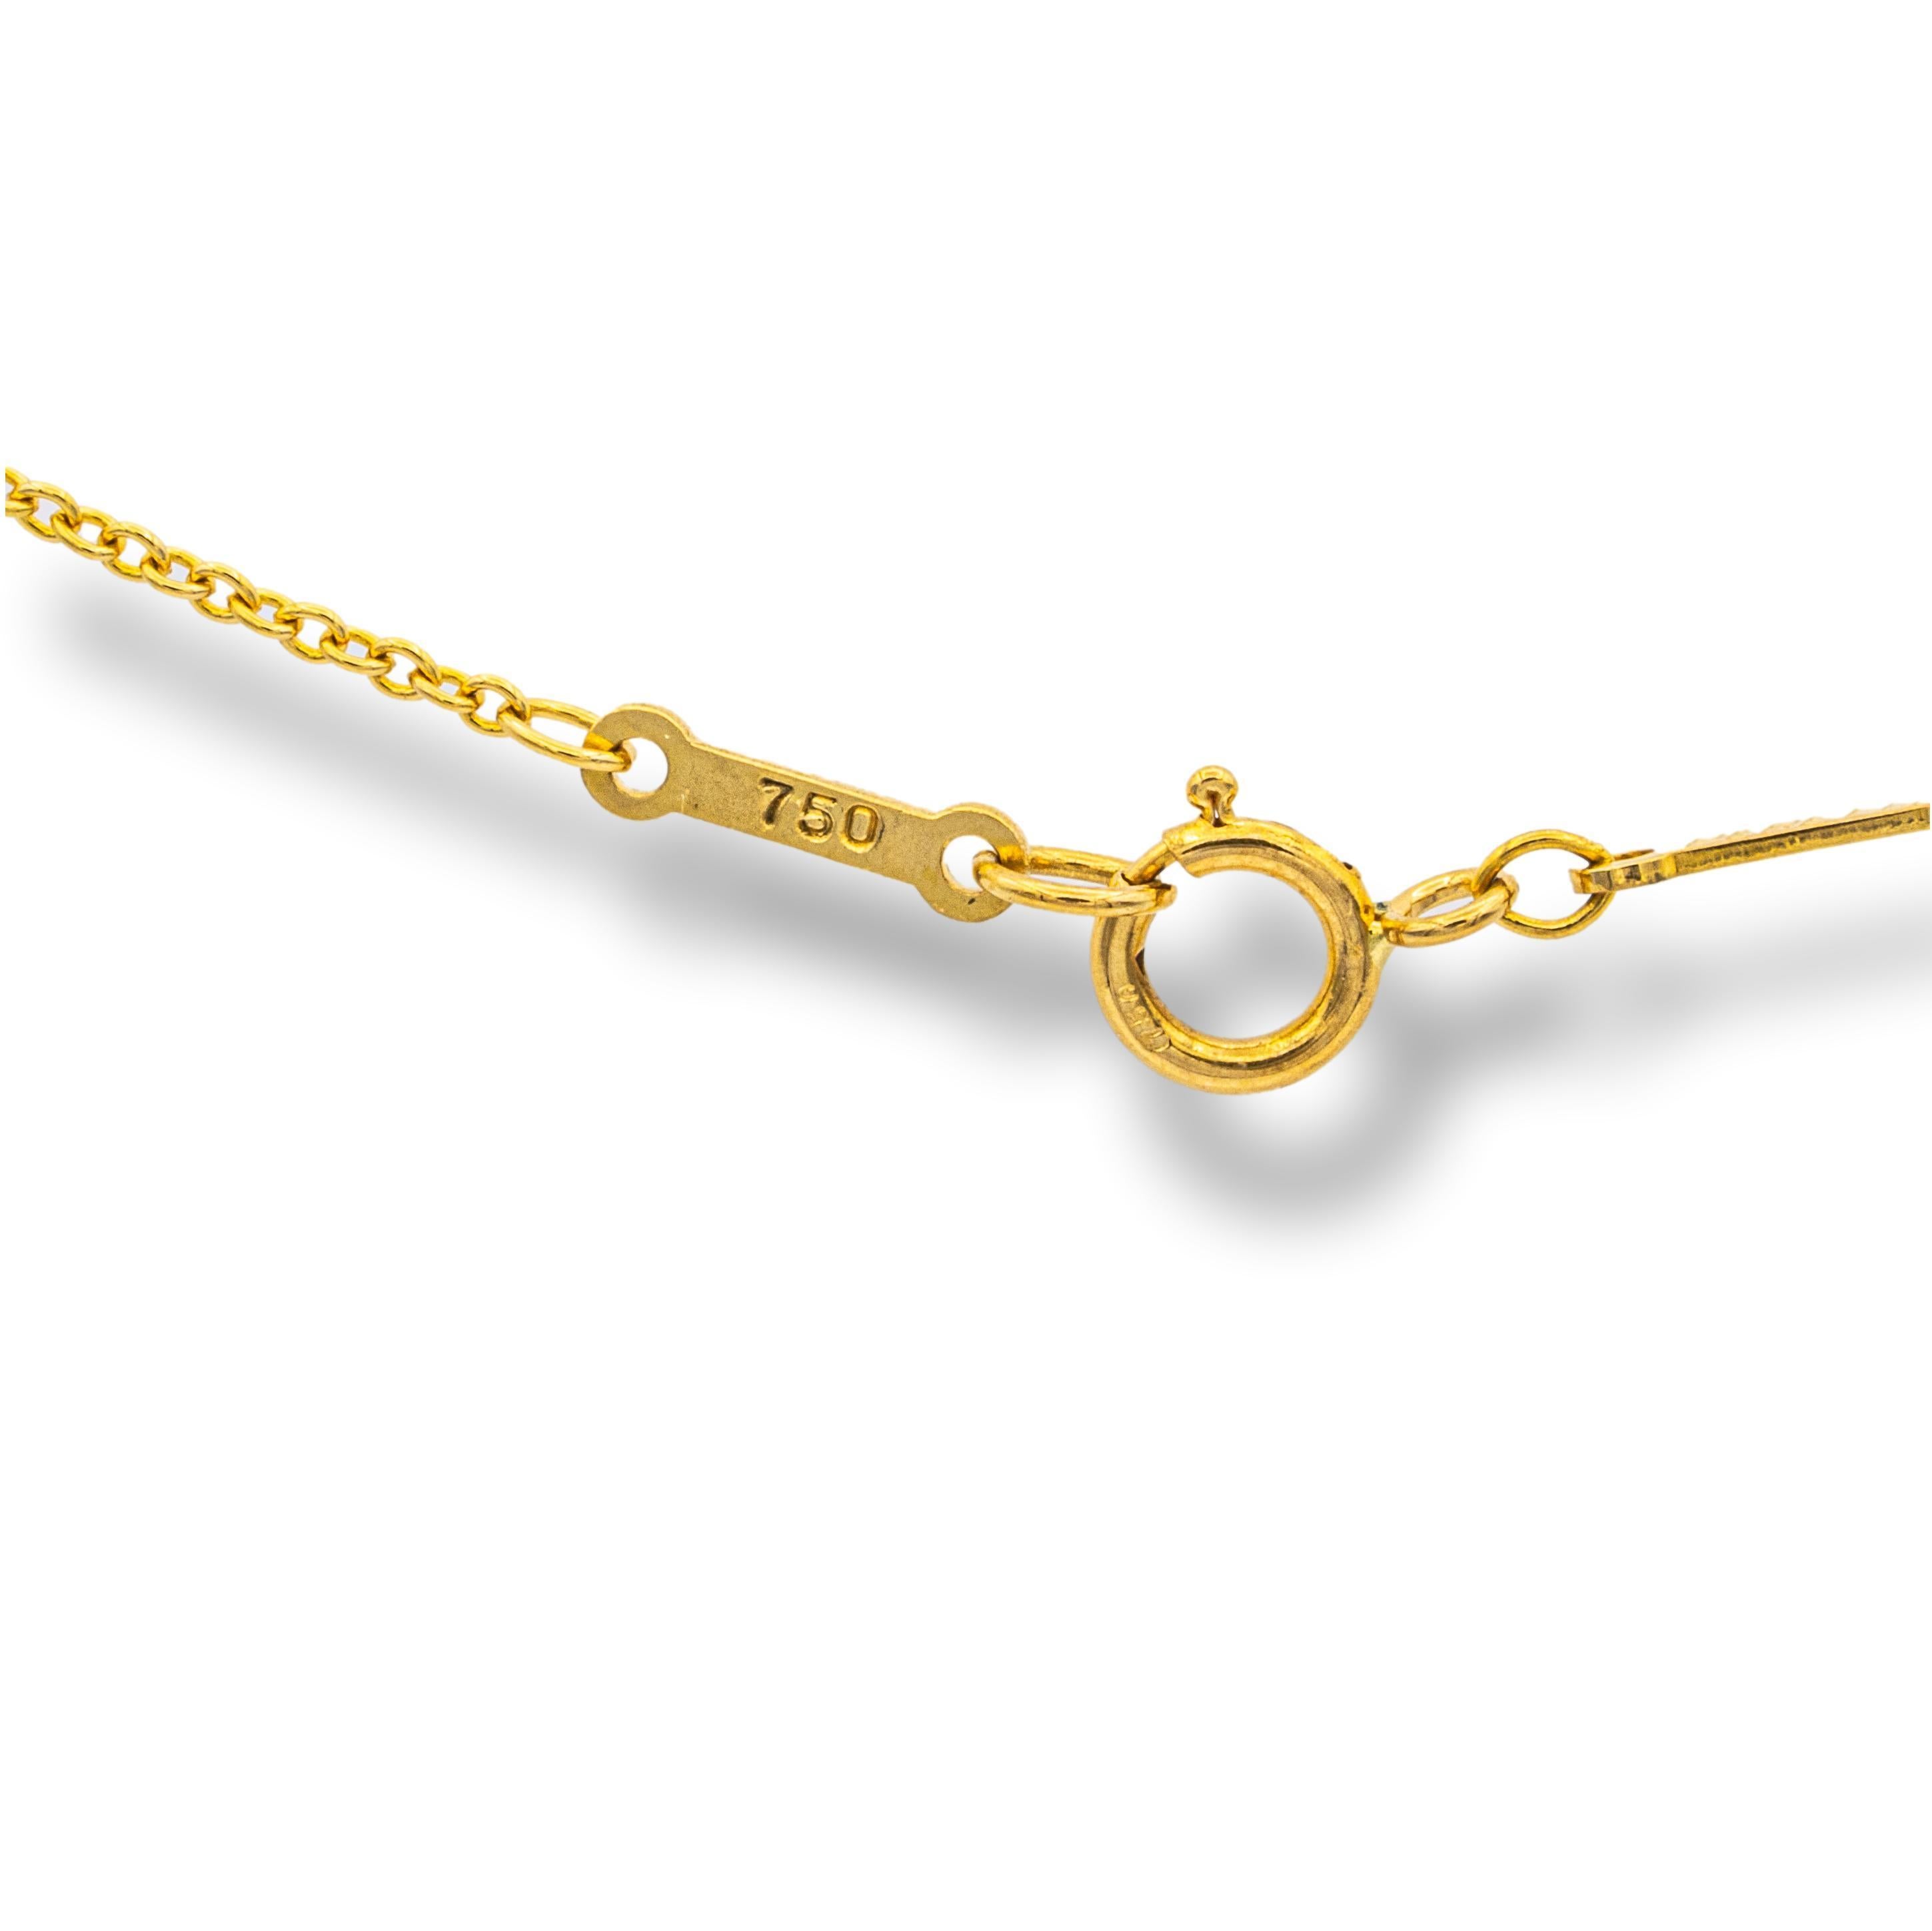 This gold diamond necklace by Tiffany & Co. is simple and stunning. The delicate chain holds a single, dazzling diamond that catches the light and sparkles with every movement. It's perfect for everyday wear or for a special occasion.

NECKLACE 